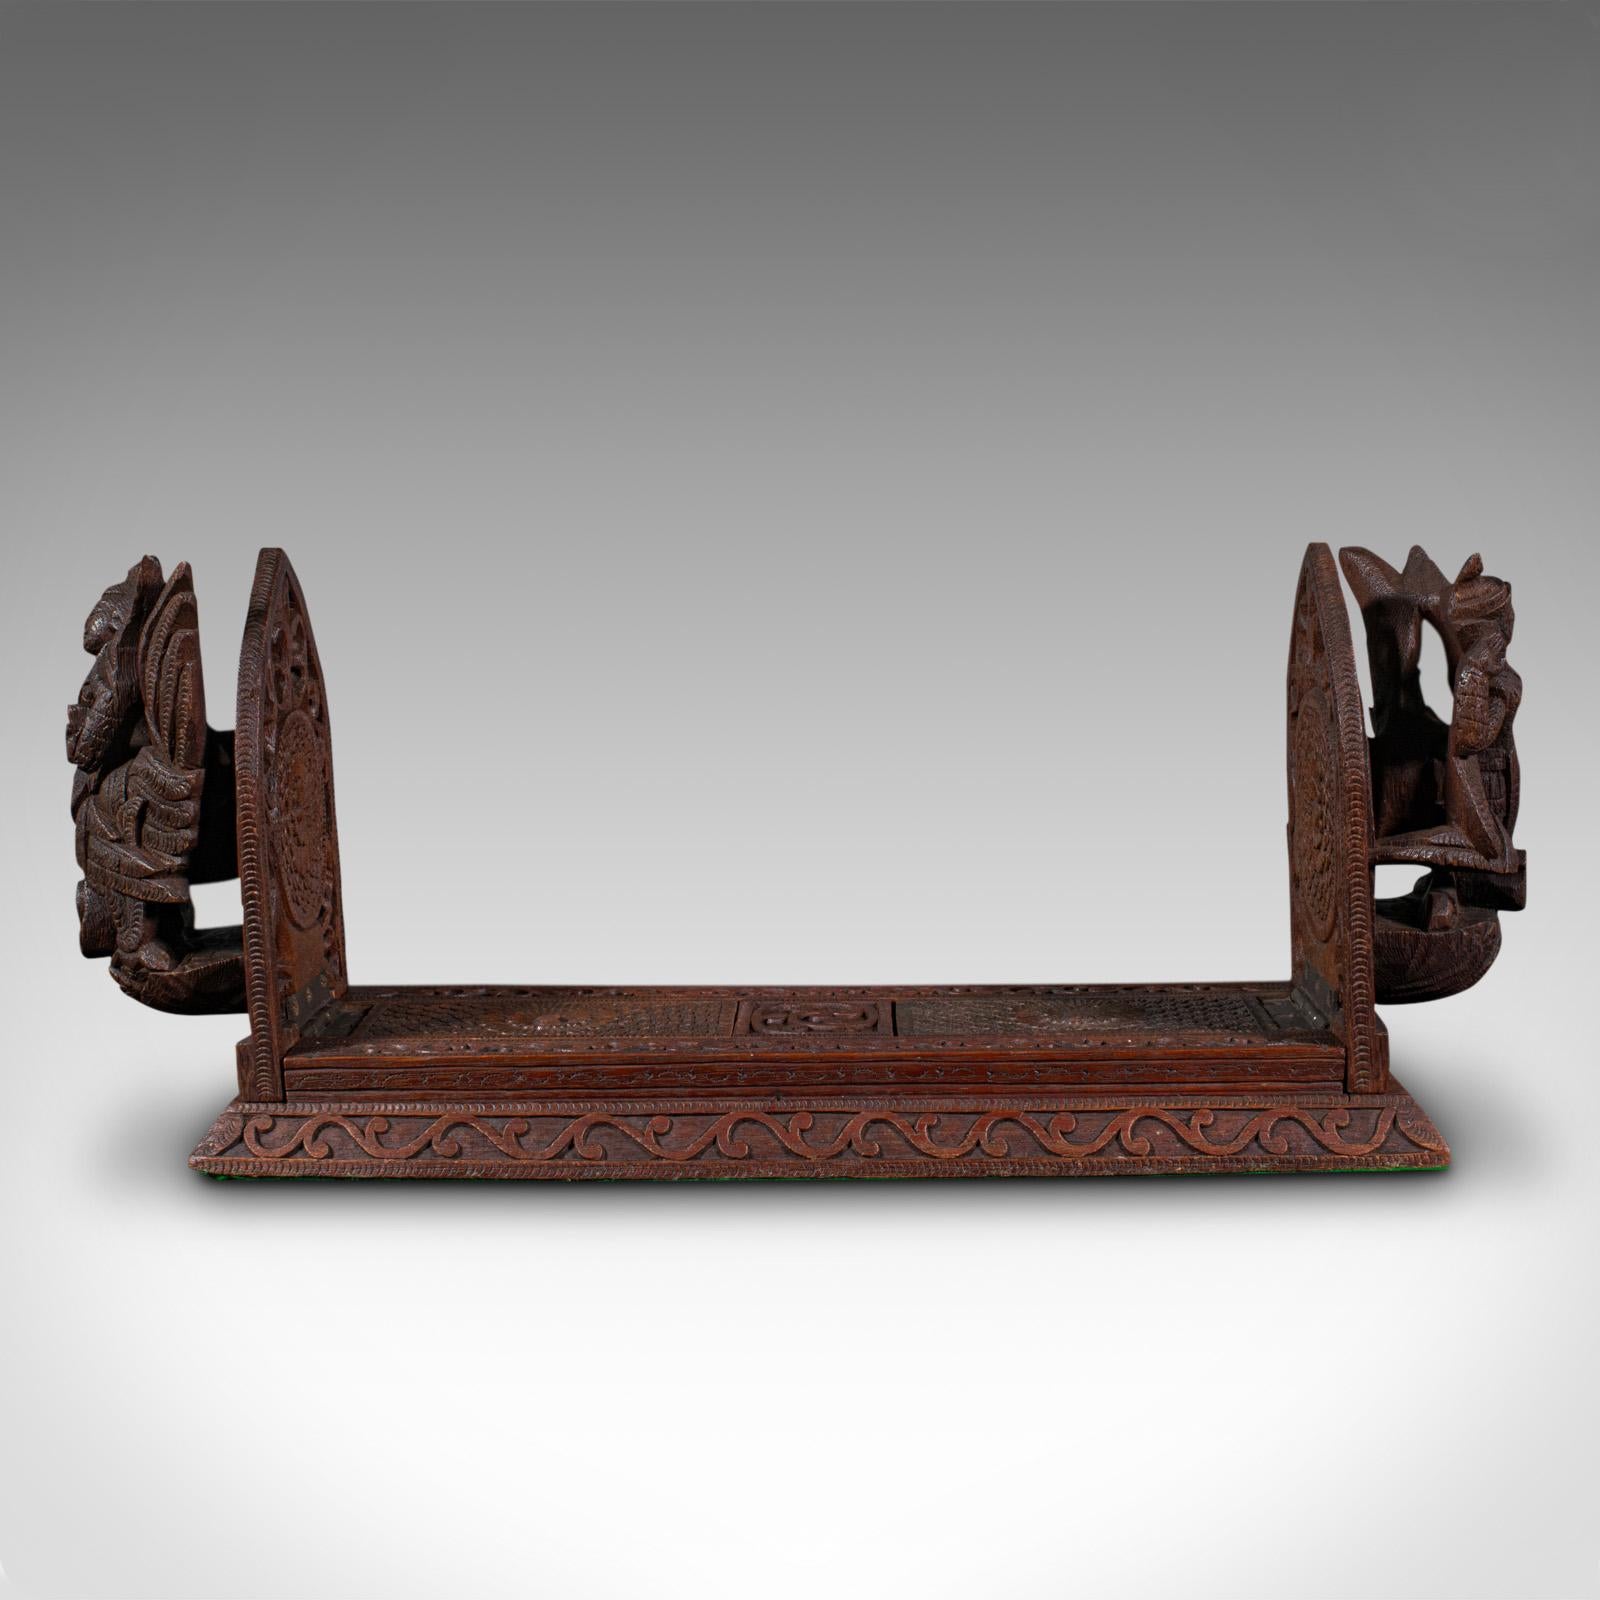 This is a vintage carved book slide. A Balinese, hardwood library stand, dating to the mid 20th century, circa 1960.

Fantastic mid-century exotic book slide with striking carved figures
Displays a desirable aged patina and in good